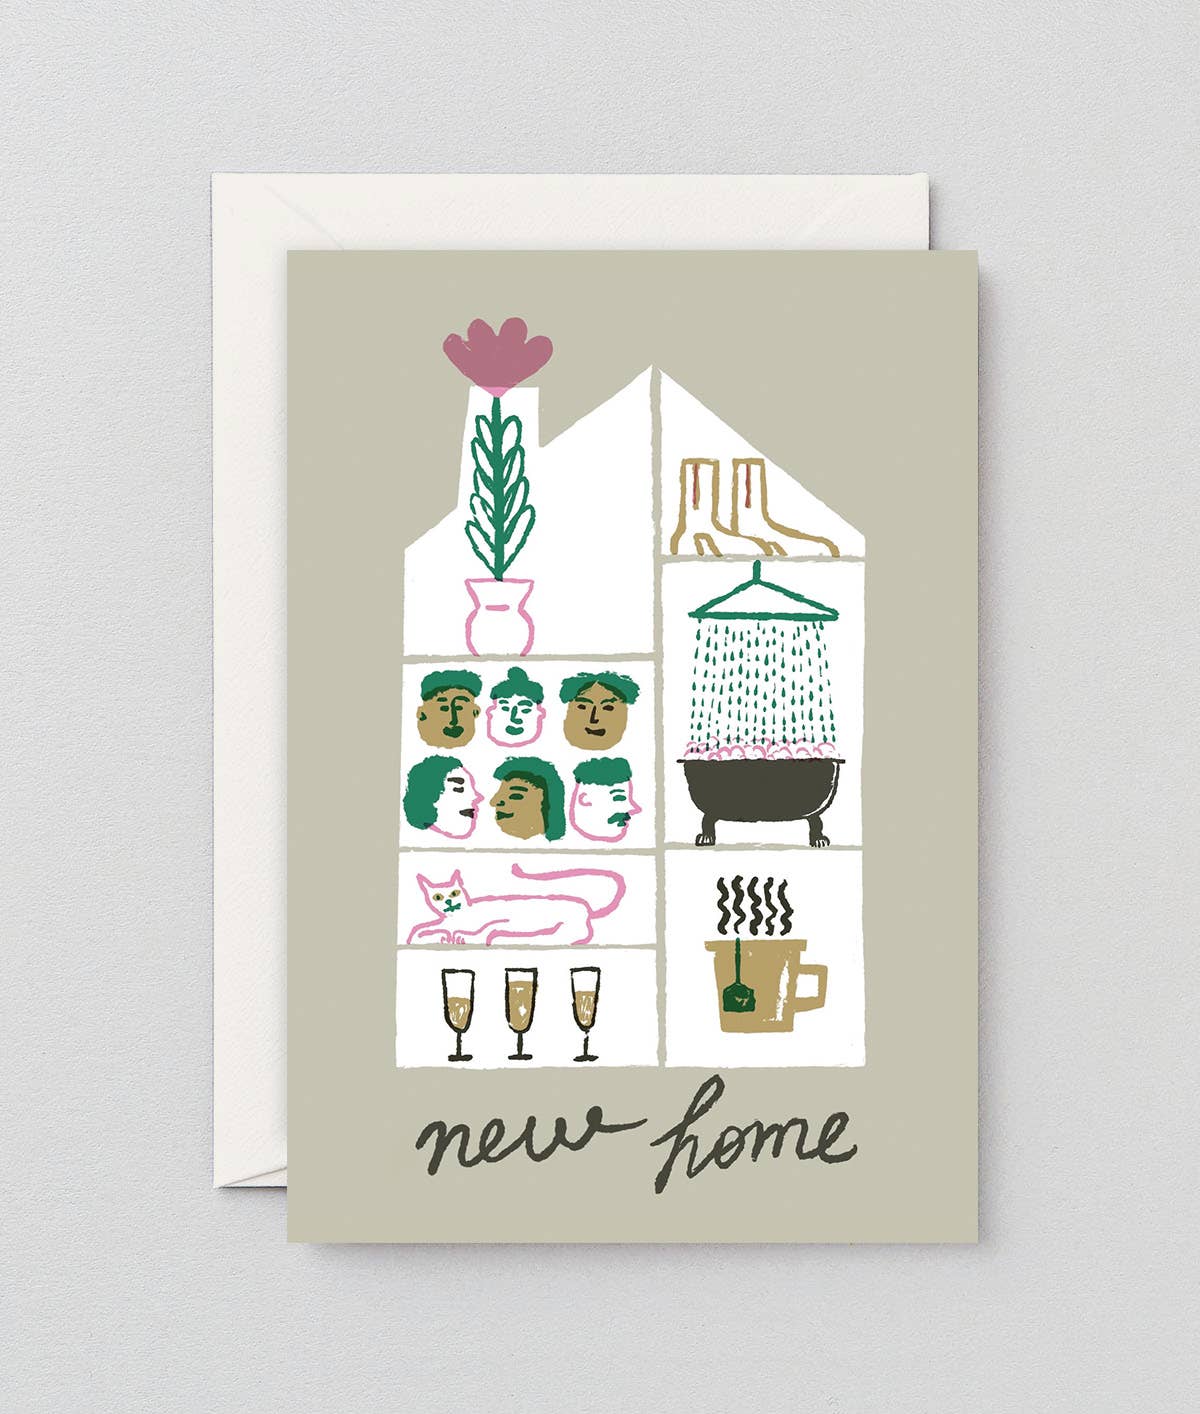 ‘New Home’ Greetings Card